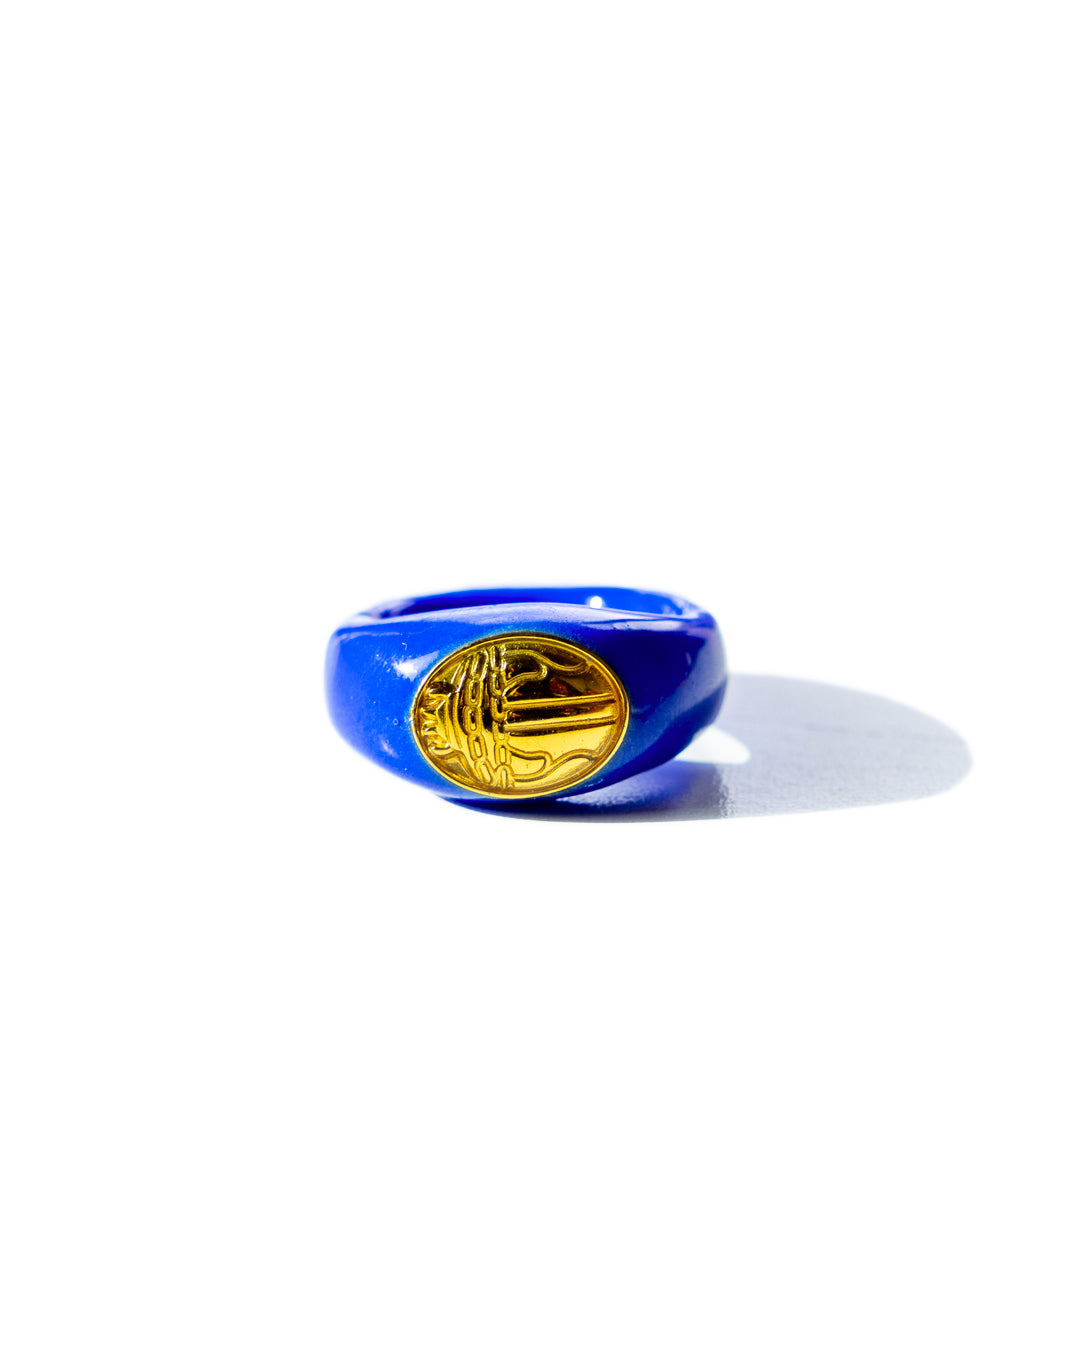 Handmade scarabeo blue polymer clay ring - Maison Stellaire